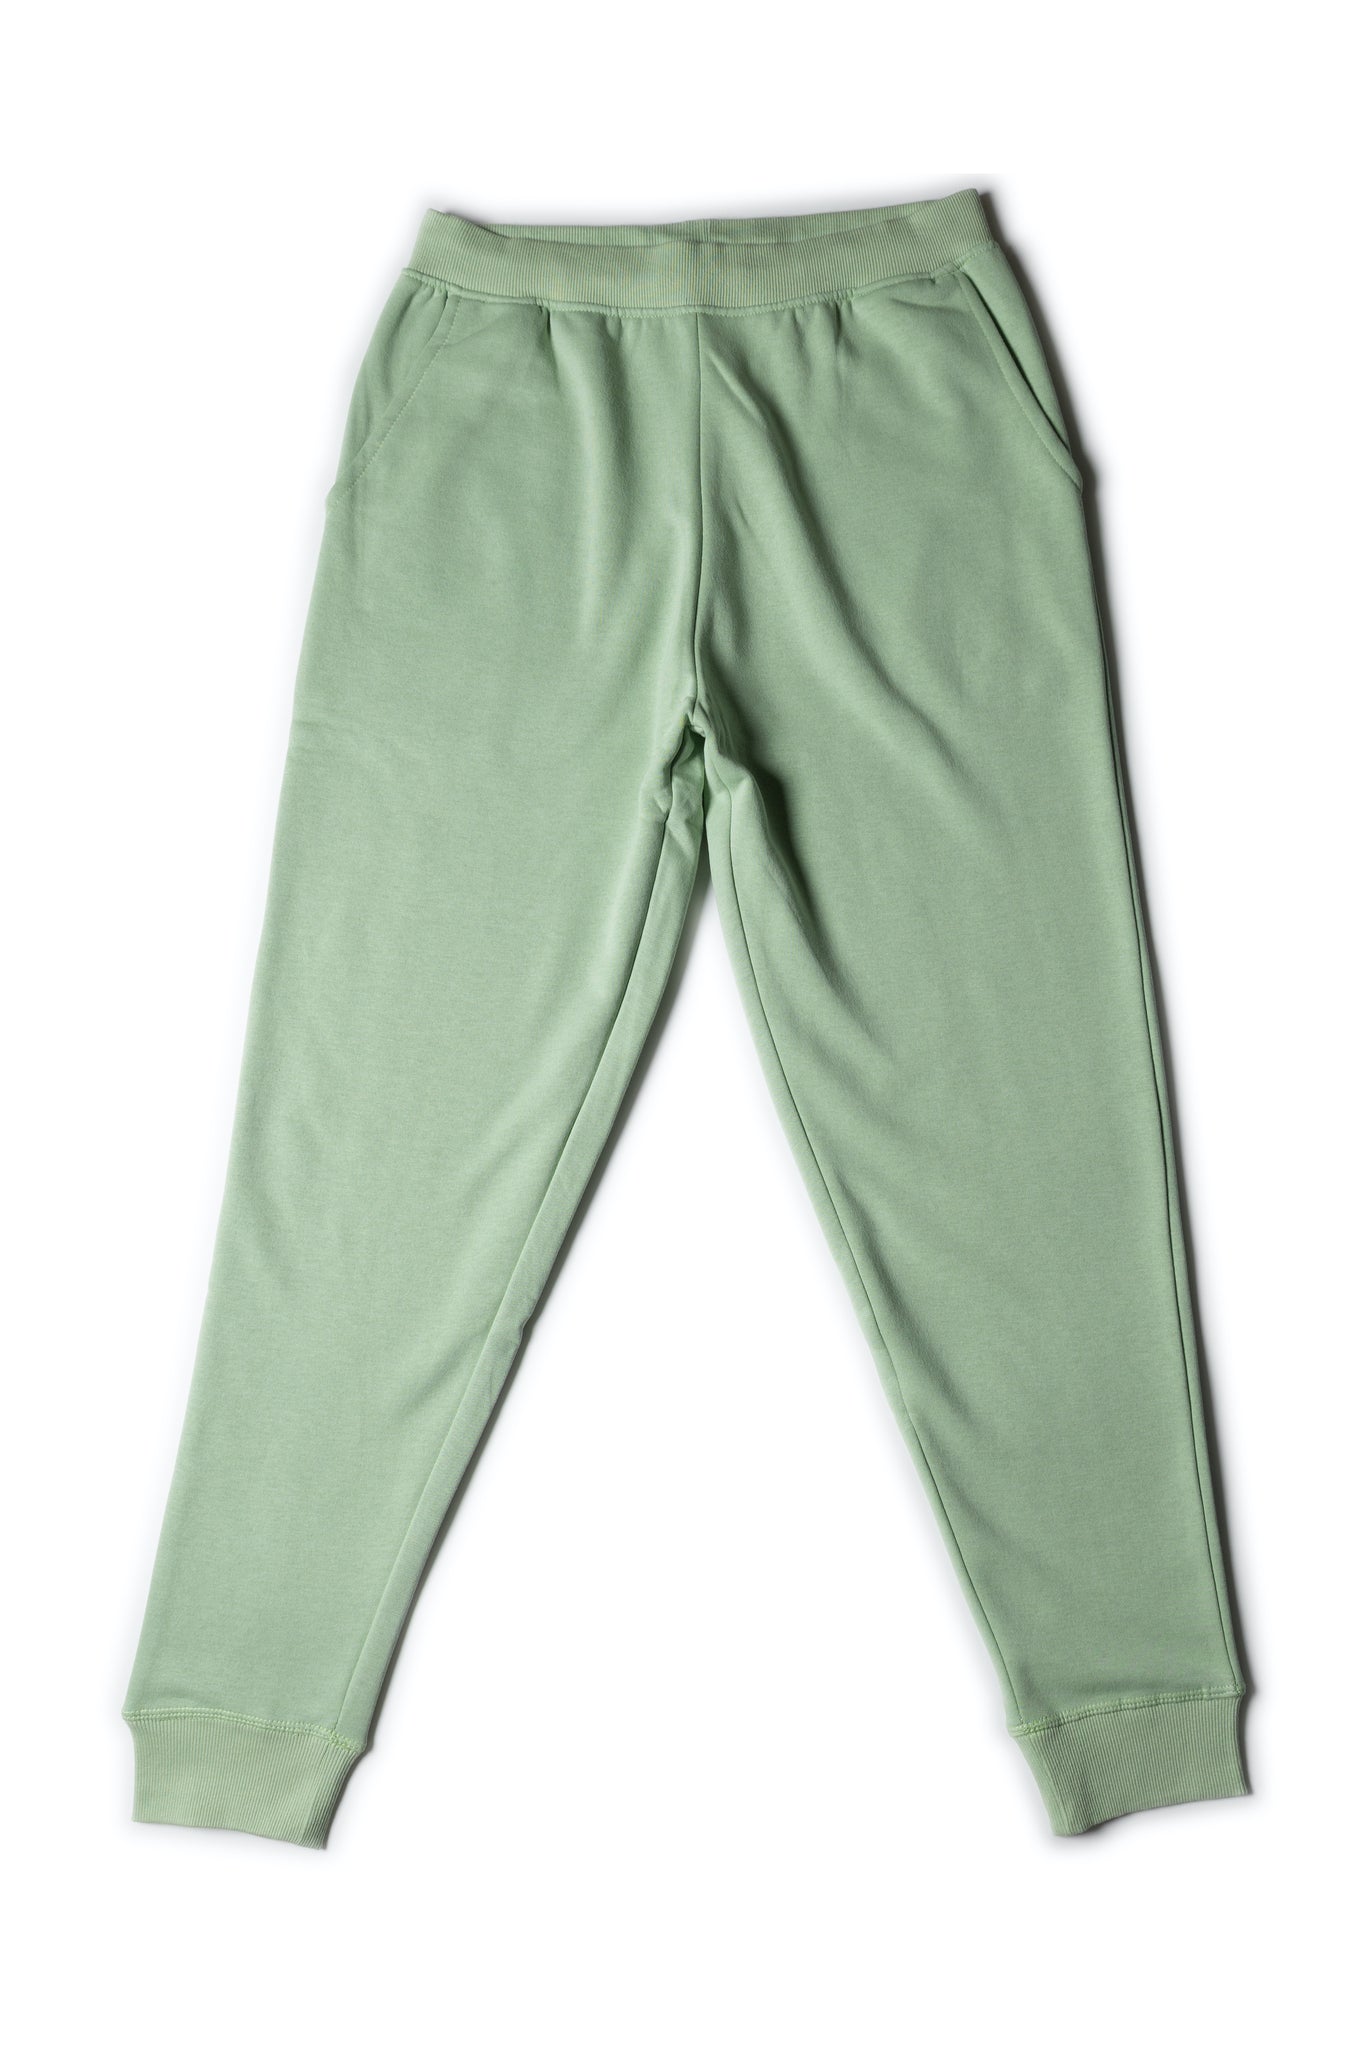 HERO-5020R Unisex Joggers - Kiwi (Relaxed Fit)